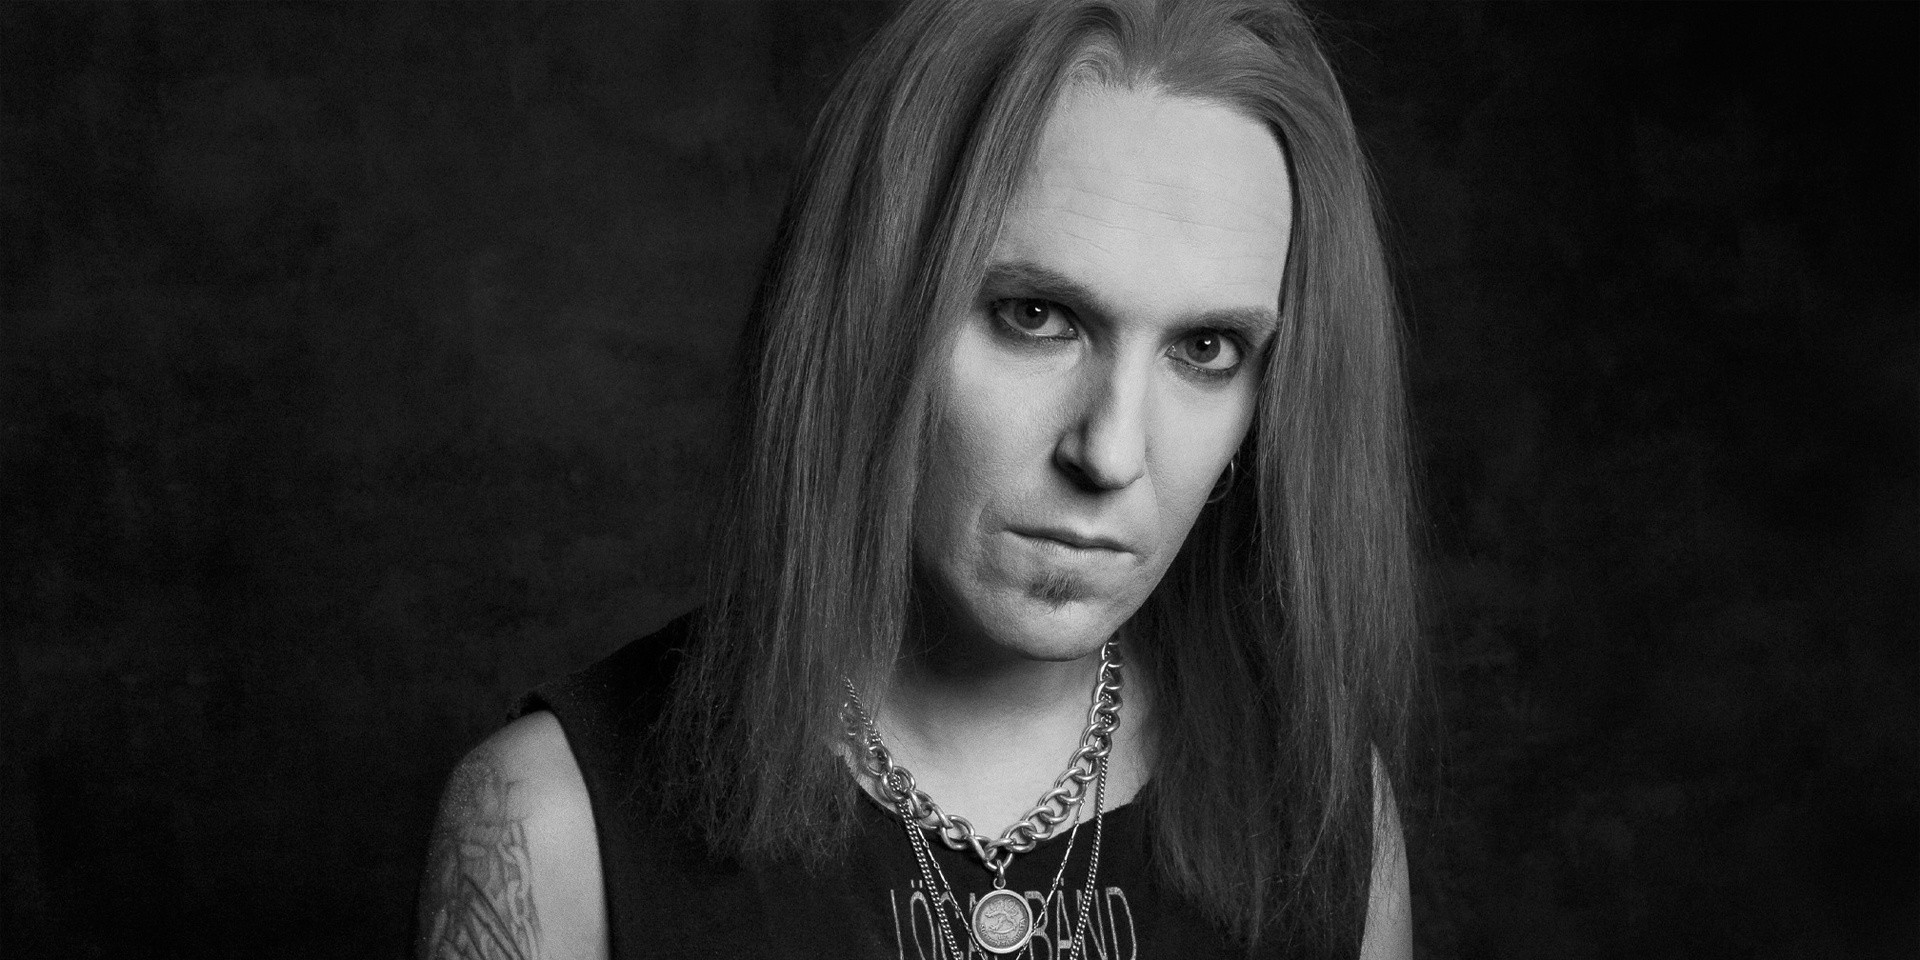 Musicians mourn the passing of former Children of Bodom frontman Alexi Laiho